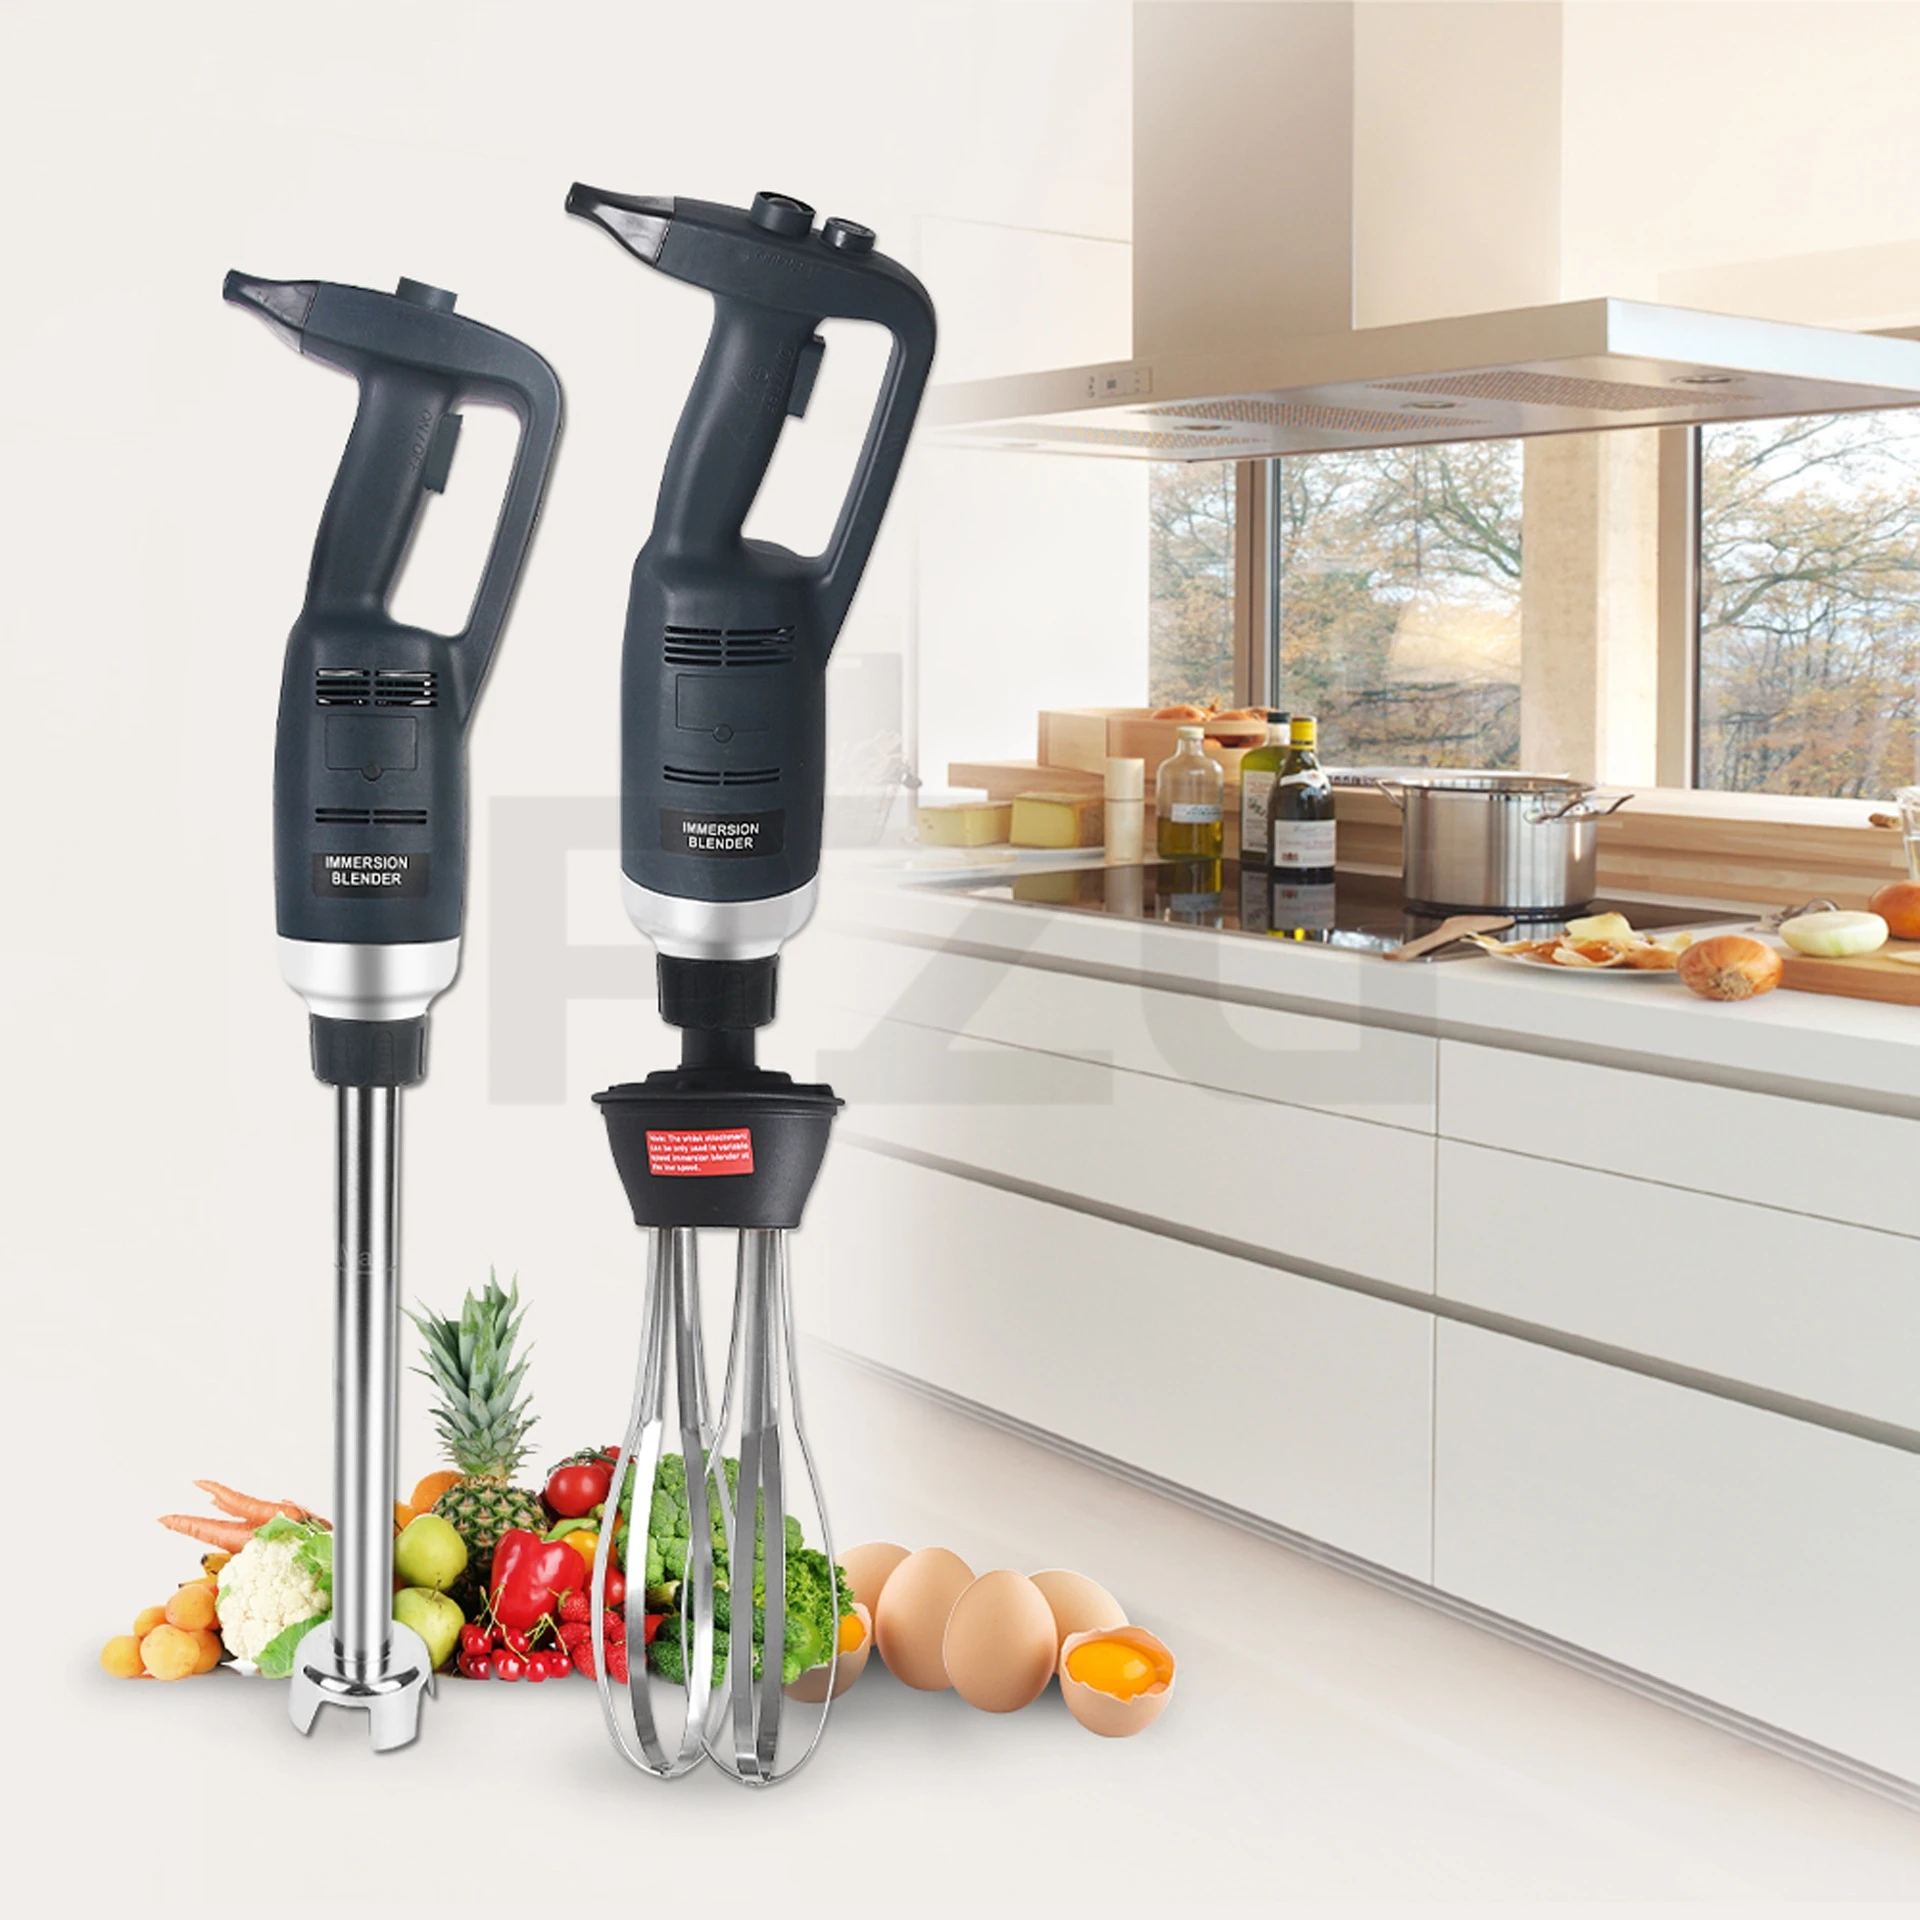 https://ae01.alicdn.com/kf/Ac7df4dcdbd9849cc849e37ae82552ce9Z/350W-Commercial-Handhold-Immersion-Blender-Food-Supplement-Machine-Juice-Extractor-Smoothie-Food-Mixer-110V-220V.jpg